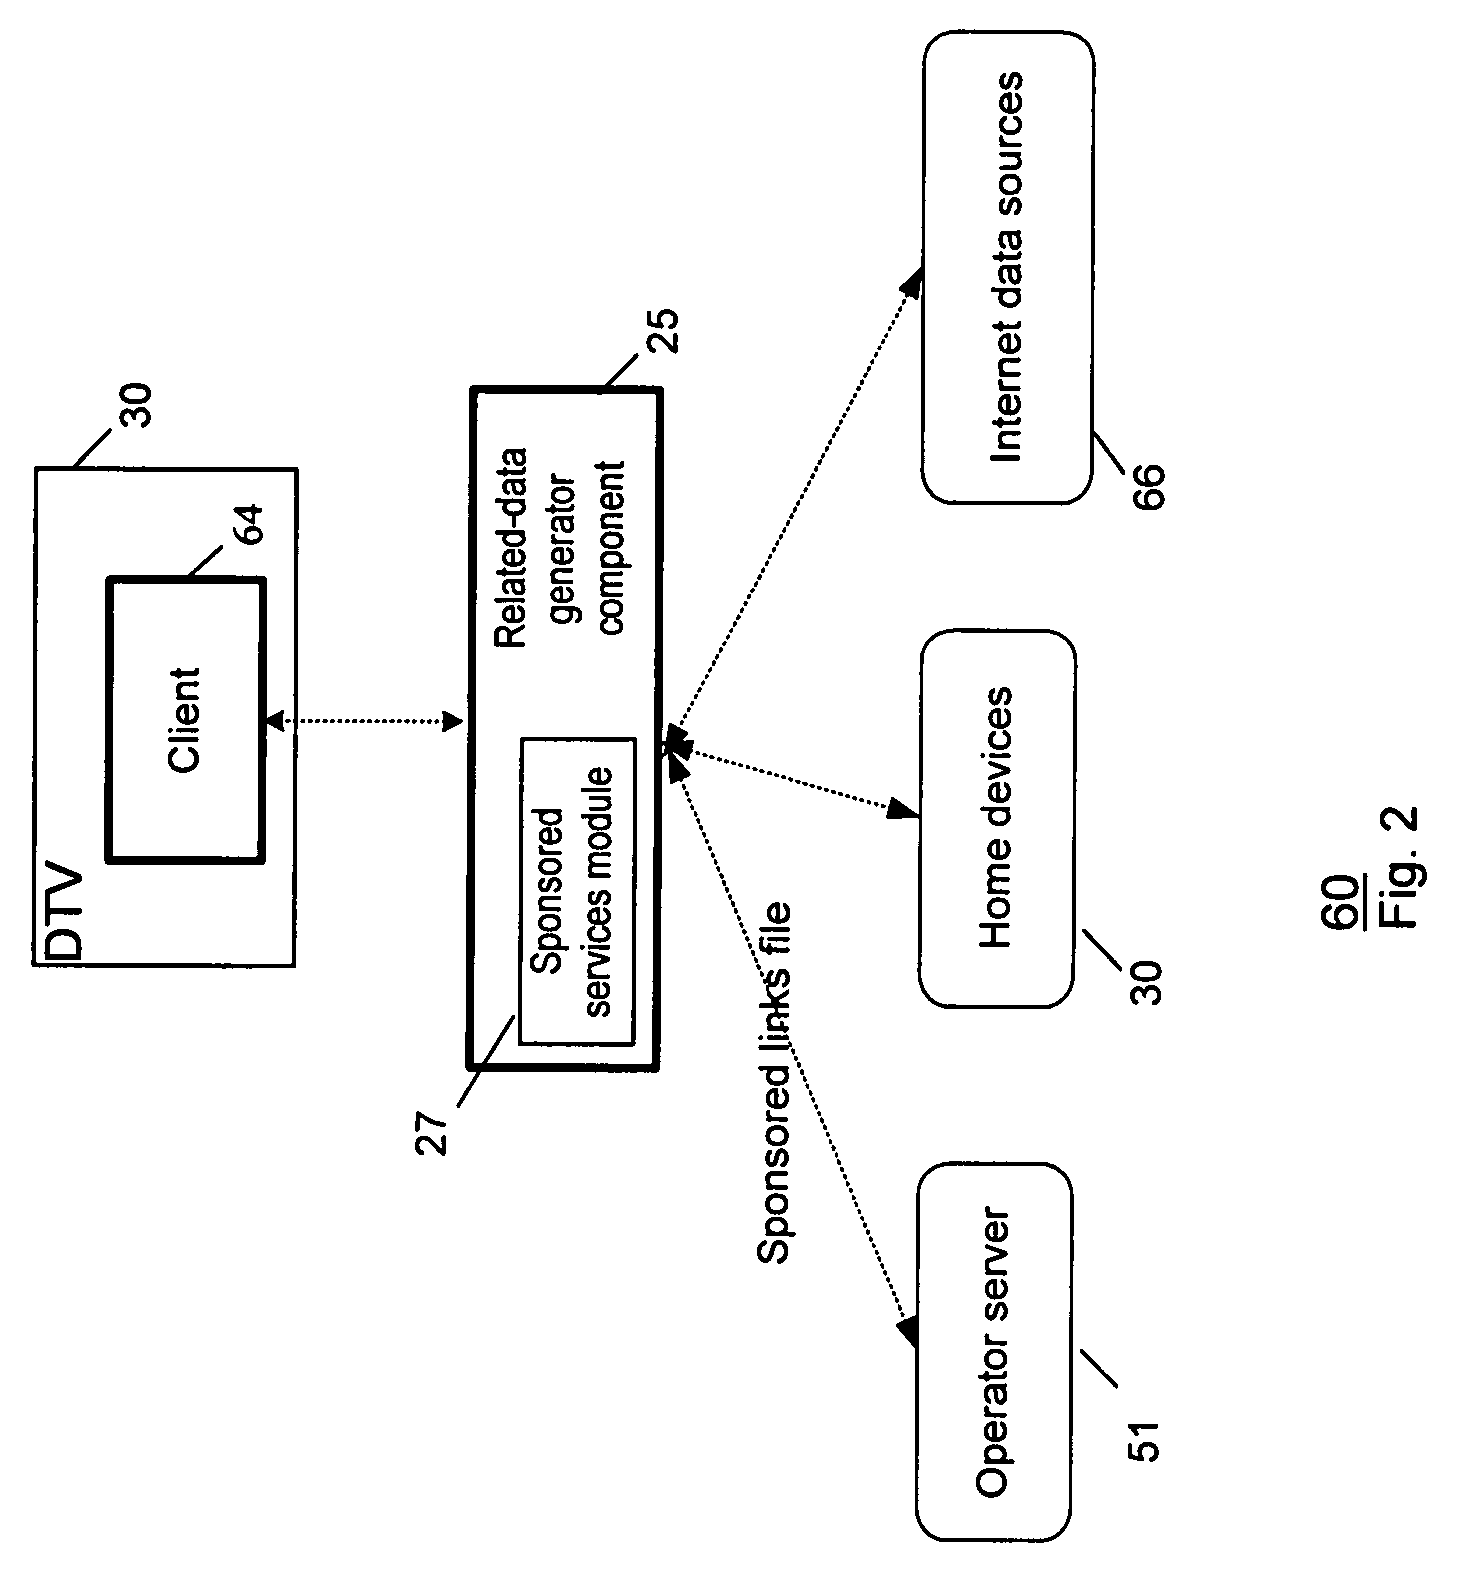 Method and system for providing sponsored information on electronic devices